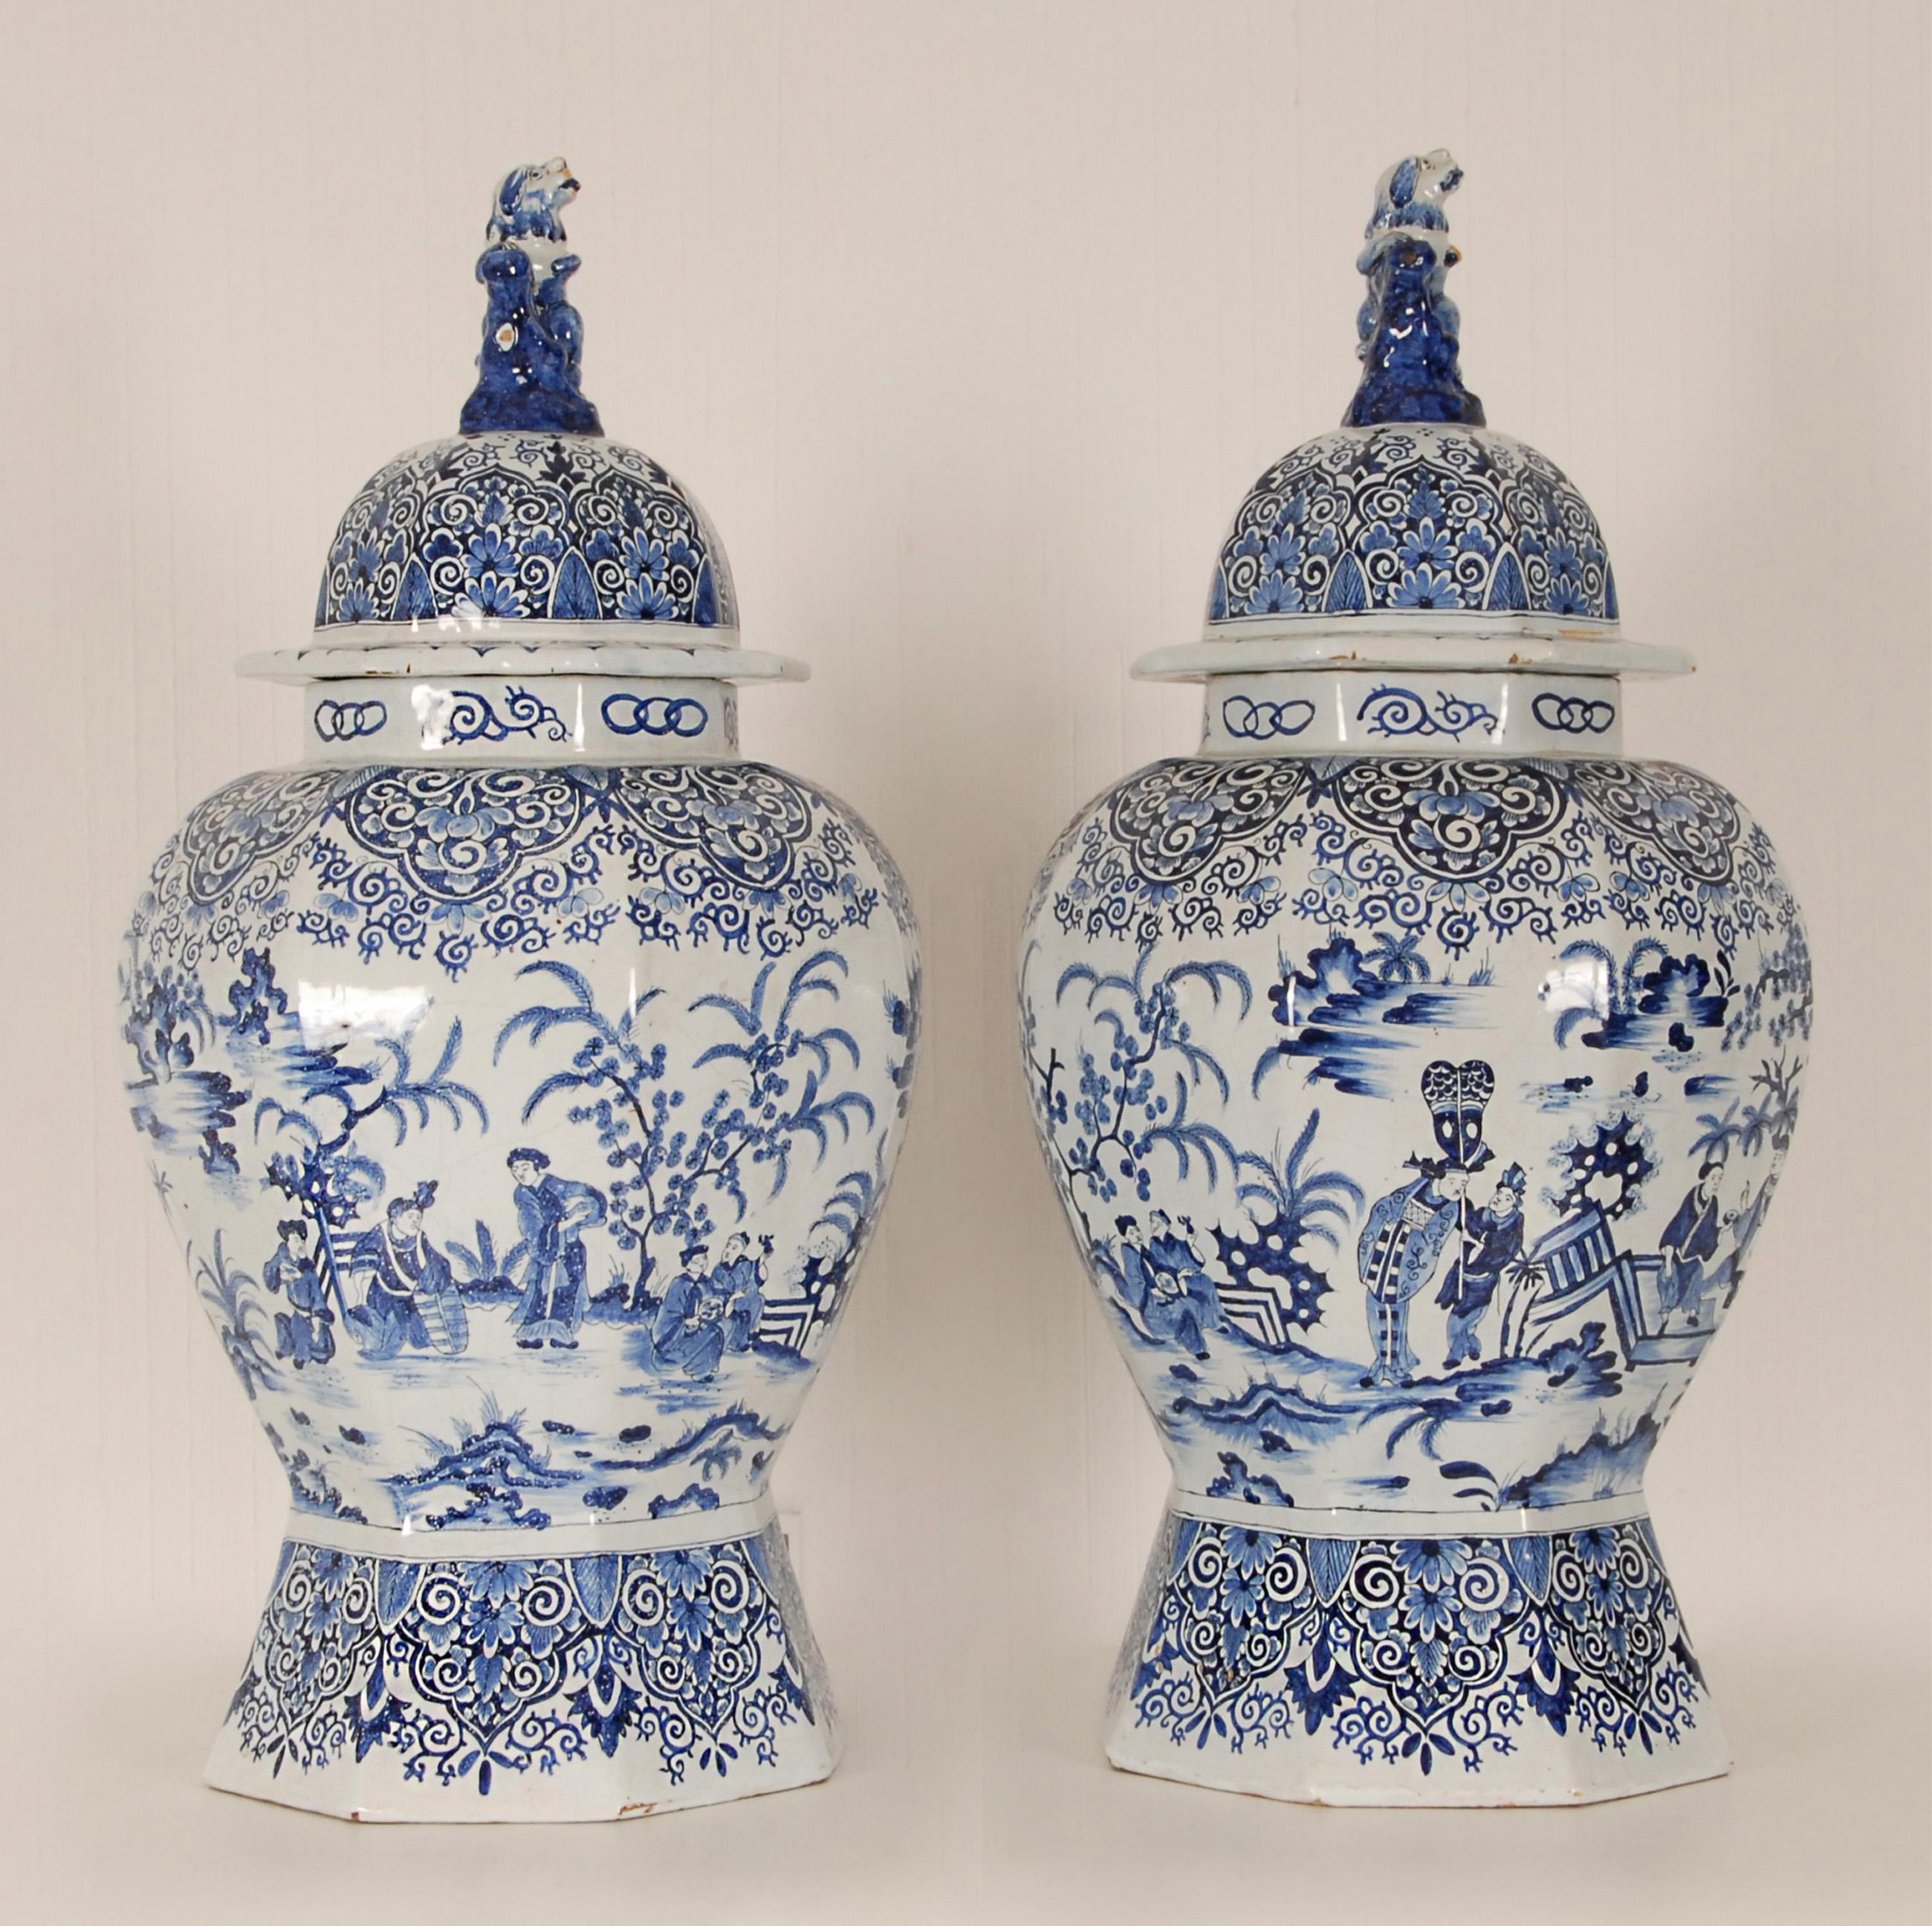 19th Century Delft Vases 17th century Style Earthenware Blue White Tall Baluster Vases a pair